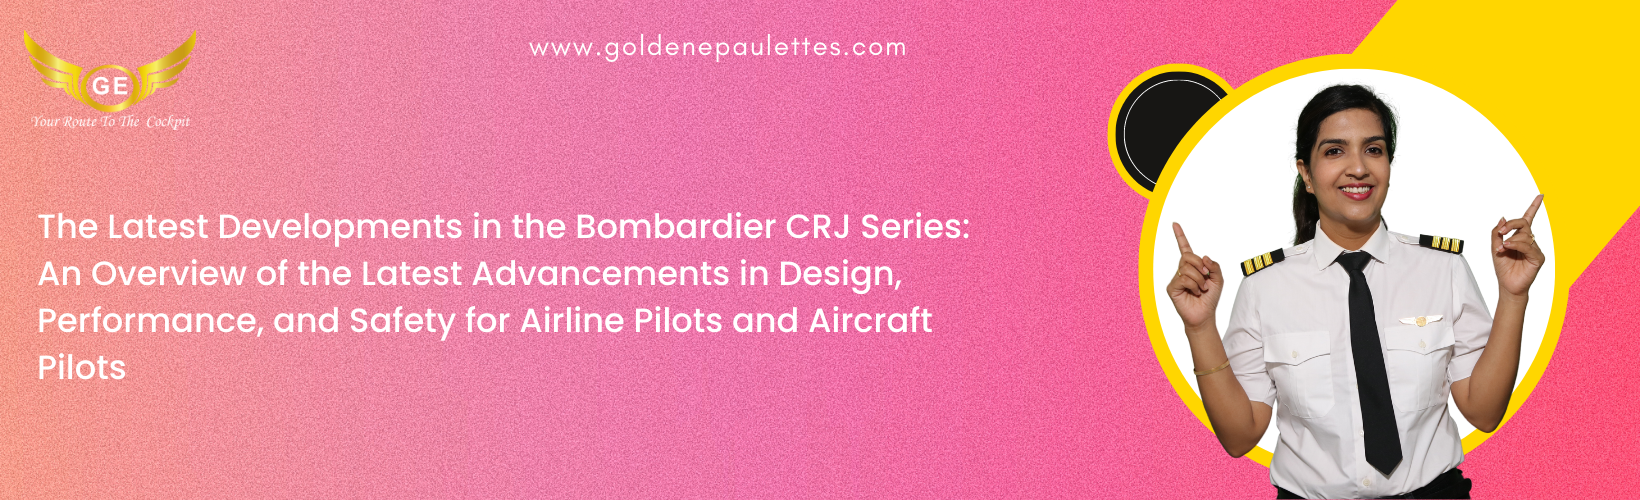 16.The Latest Developments in the Bombardier CRJ Series